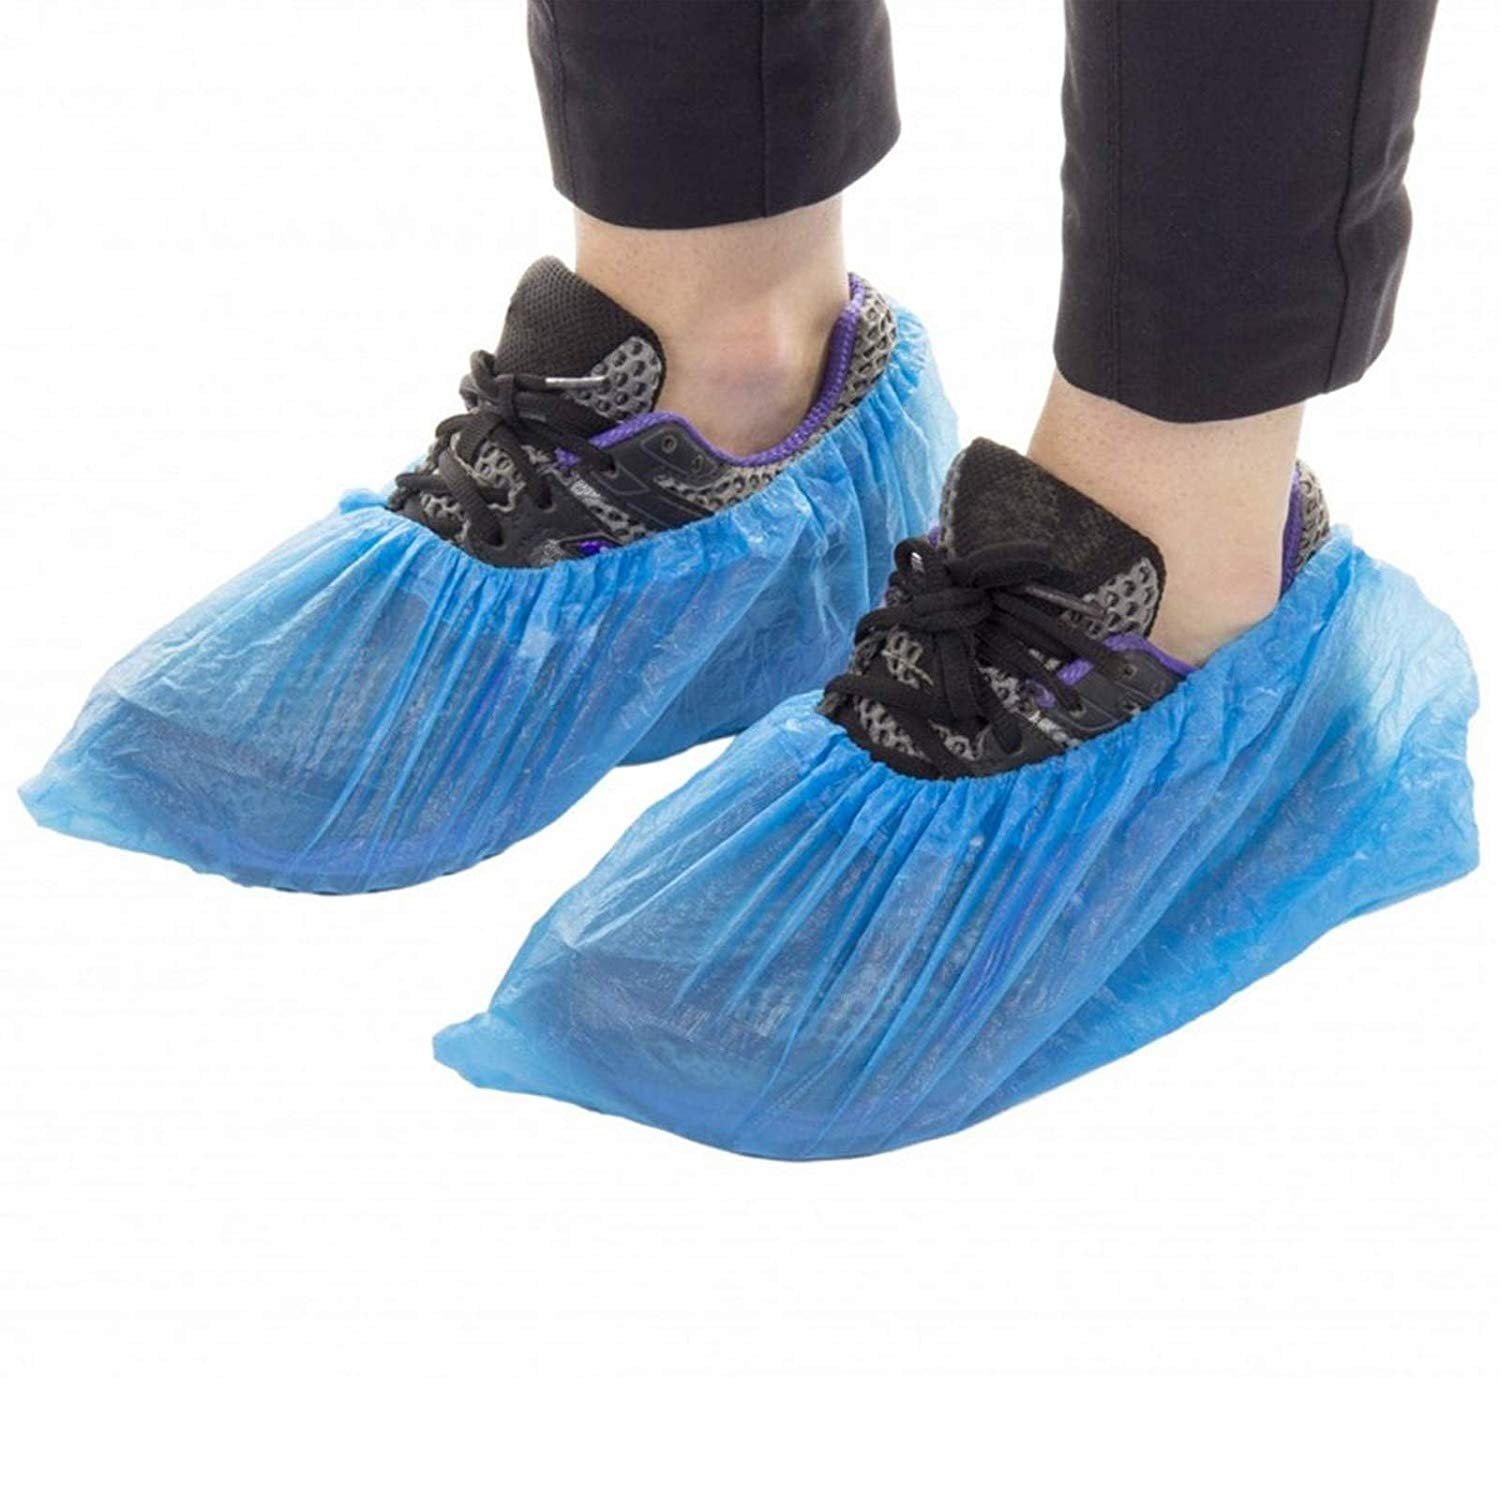 100-1000x Disposable Hygienic Shoe Boot Covers for Home Office Lab Hospital 